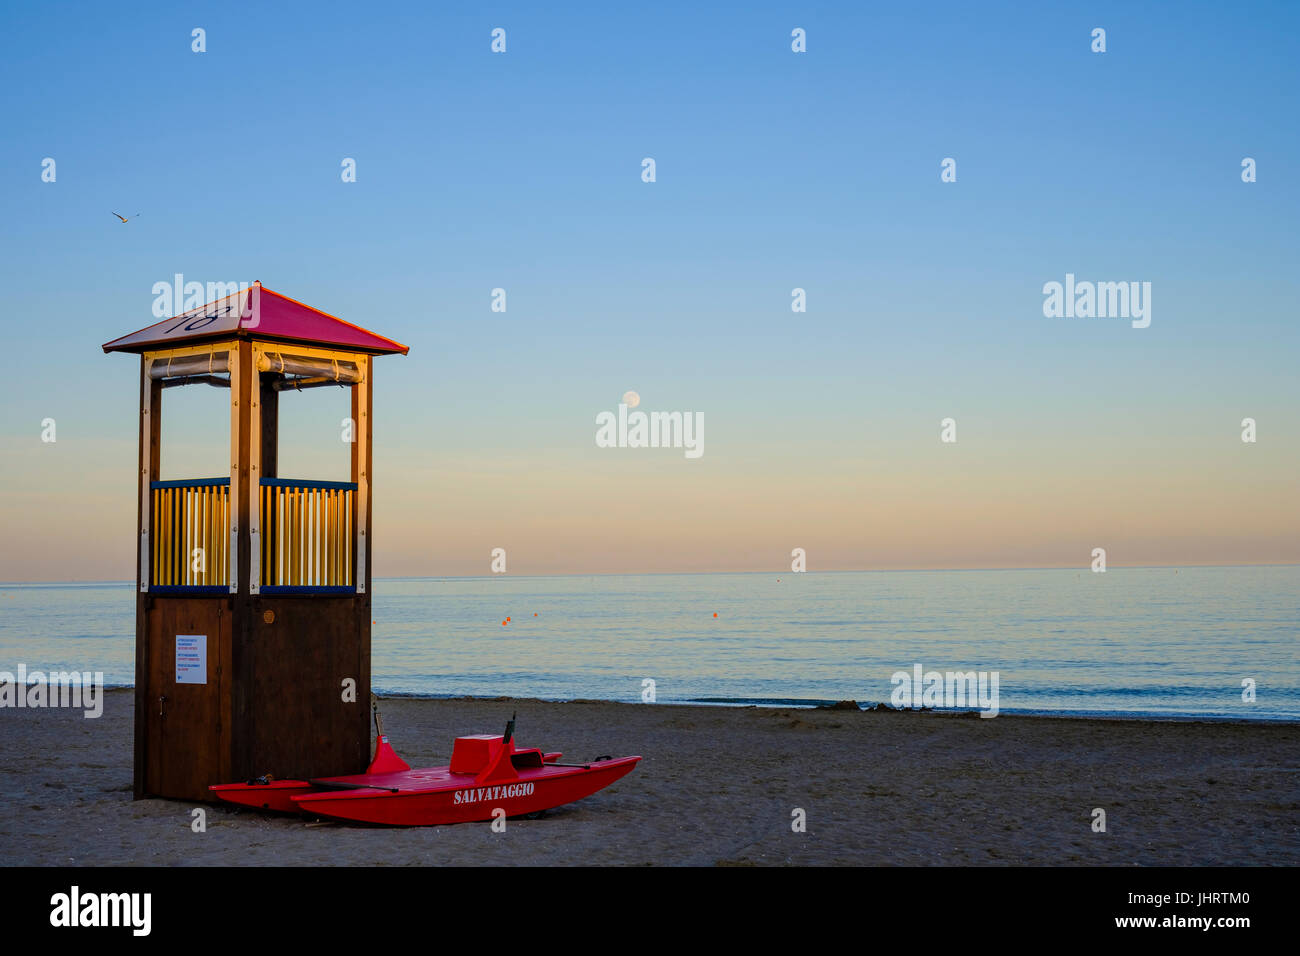 Rescue tower and rescue boat on the beach, Adriatic Sea, Italy Stock Photo